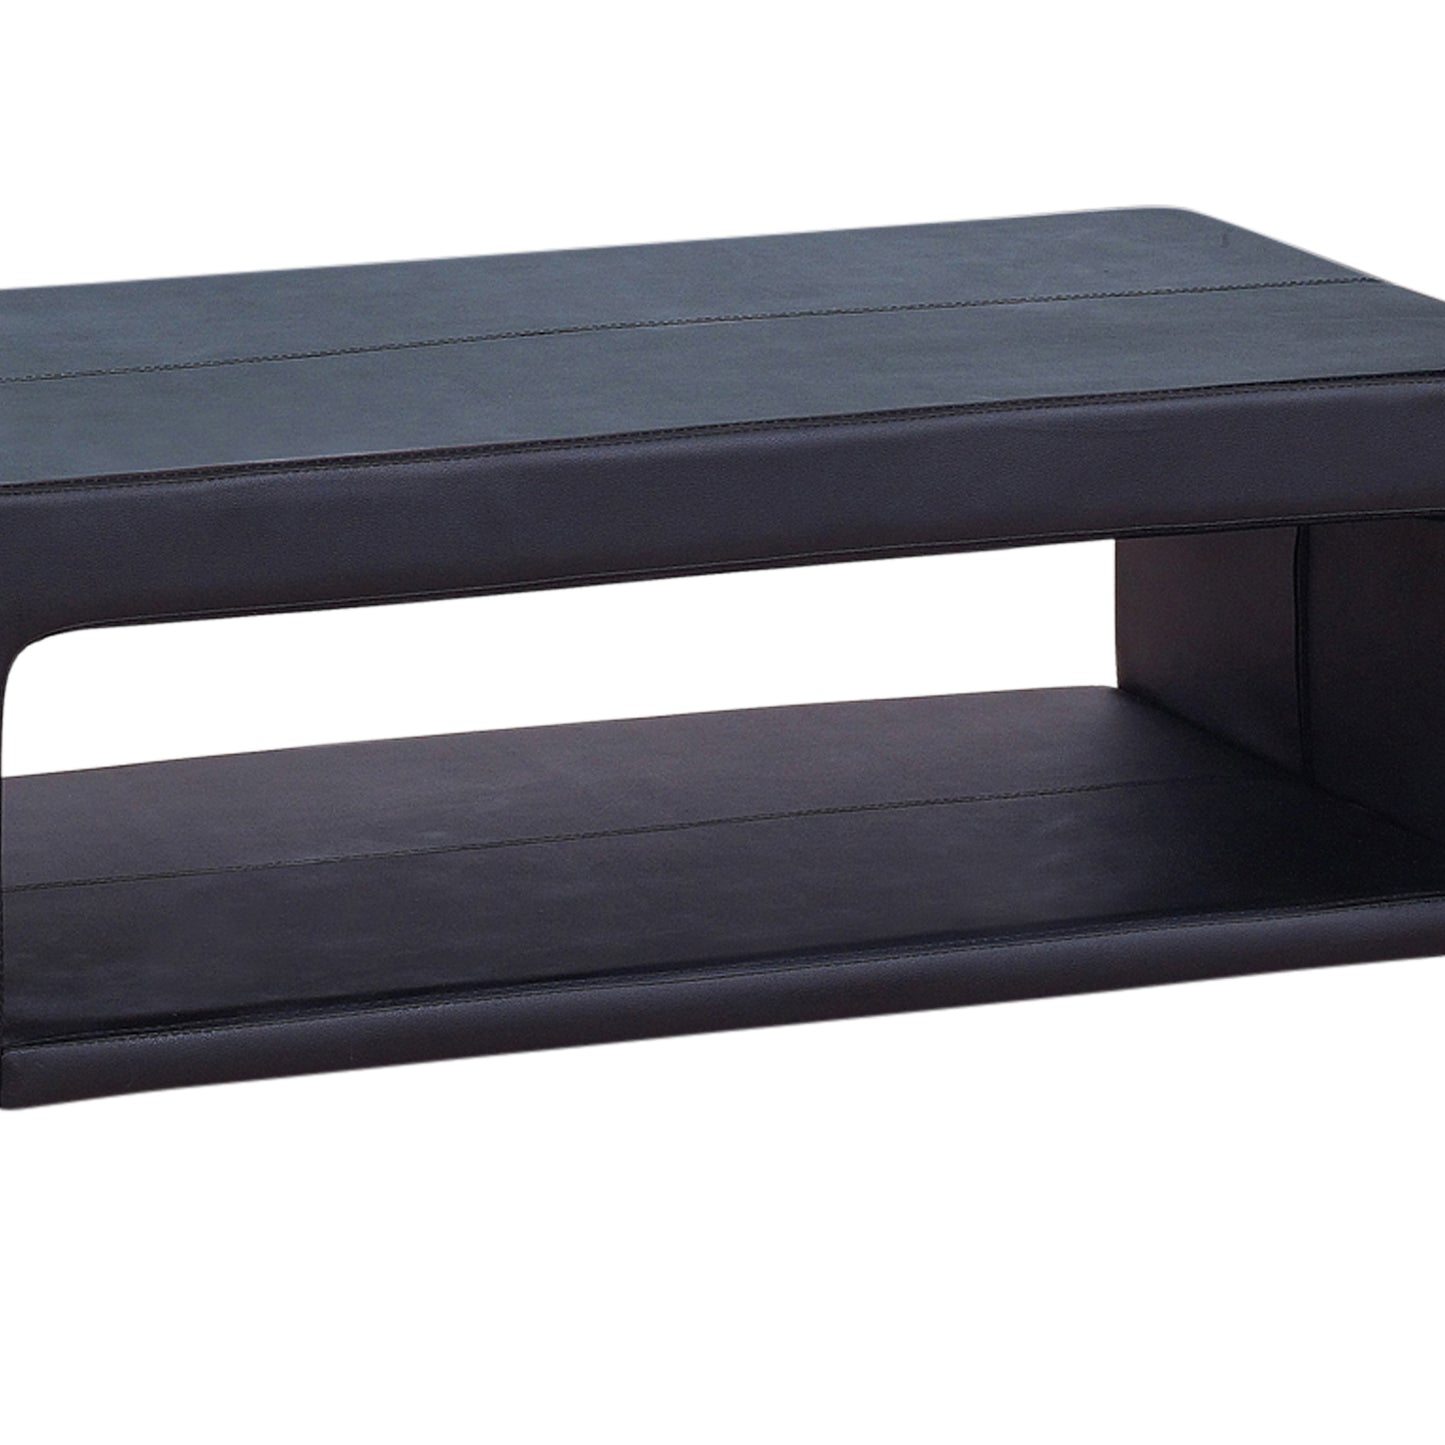 Coffee Table Upholstered PU Leather in Black Colour with open storage - image4